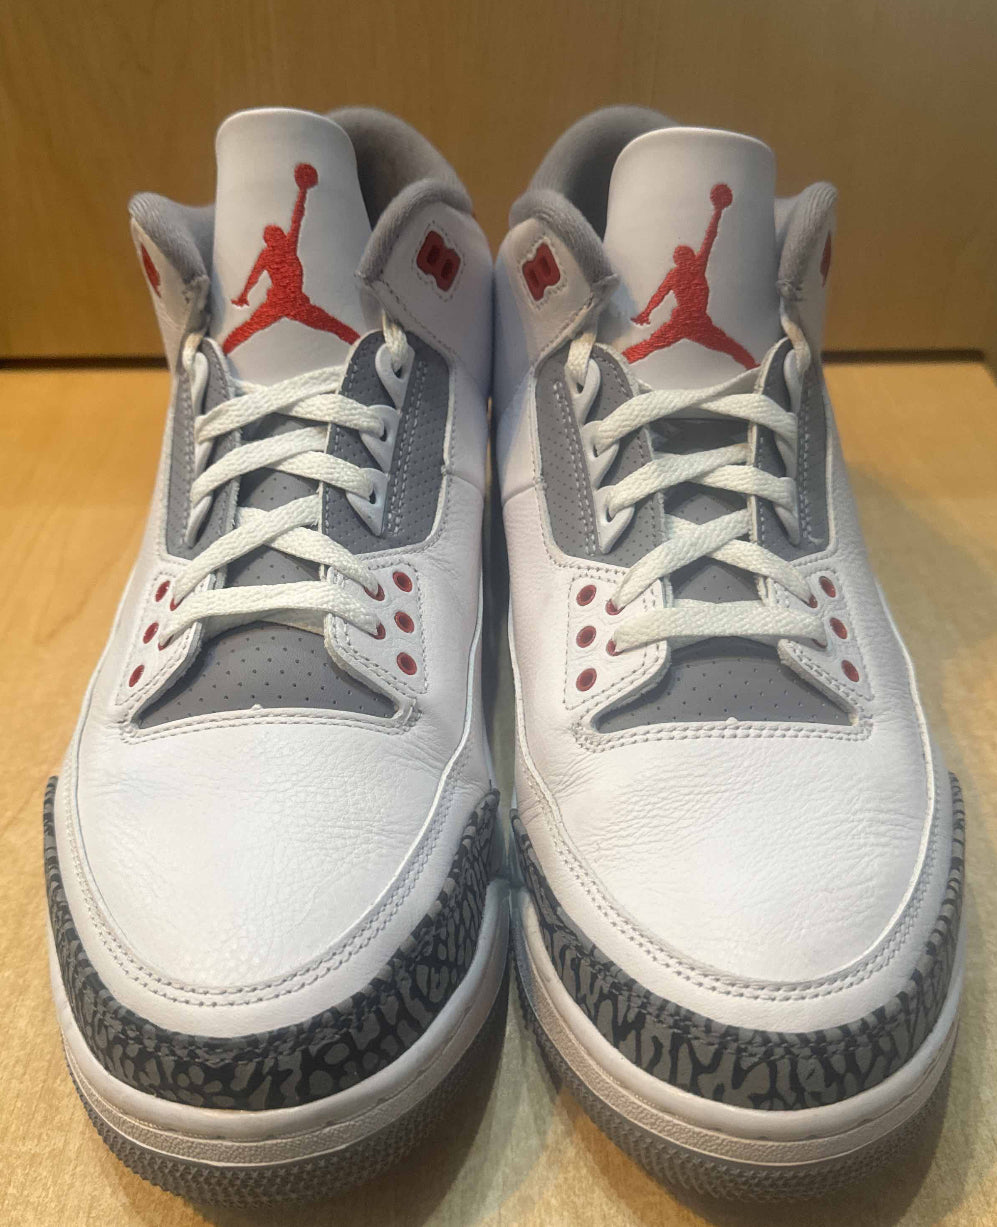 Fire Red 3s Size 13